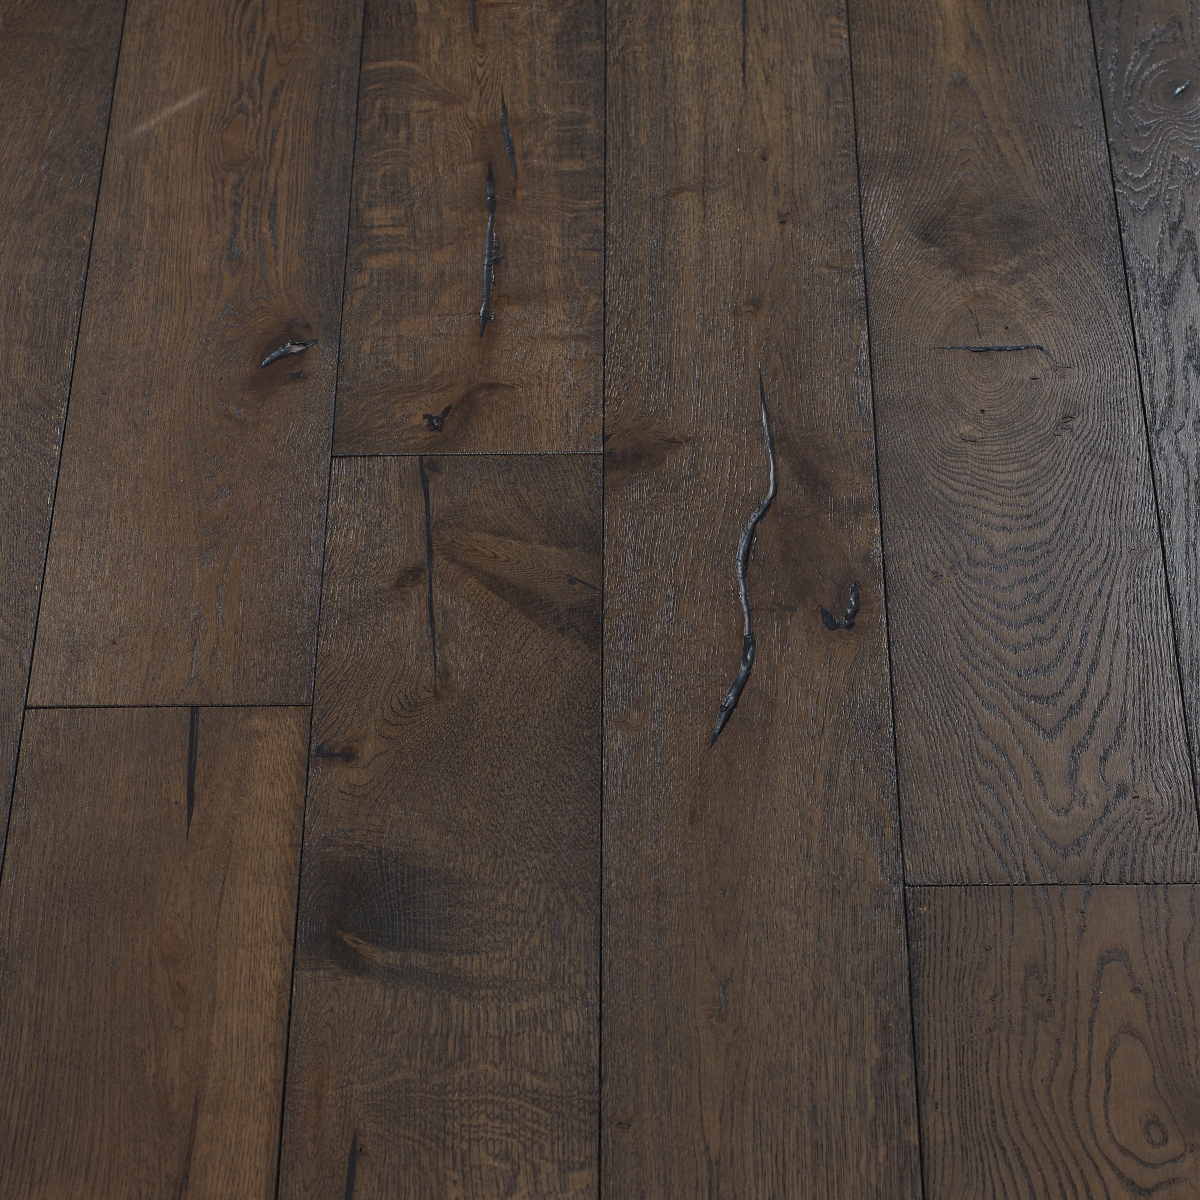 Distressed Carbon Flooring: A view of distressed carbon flooring, characterized by its deep charcoal-gray colour with distressed textures, offering a modern and sleek aesthetic.